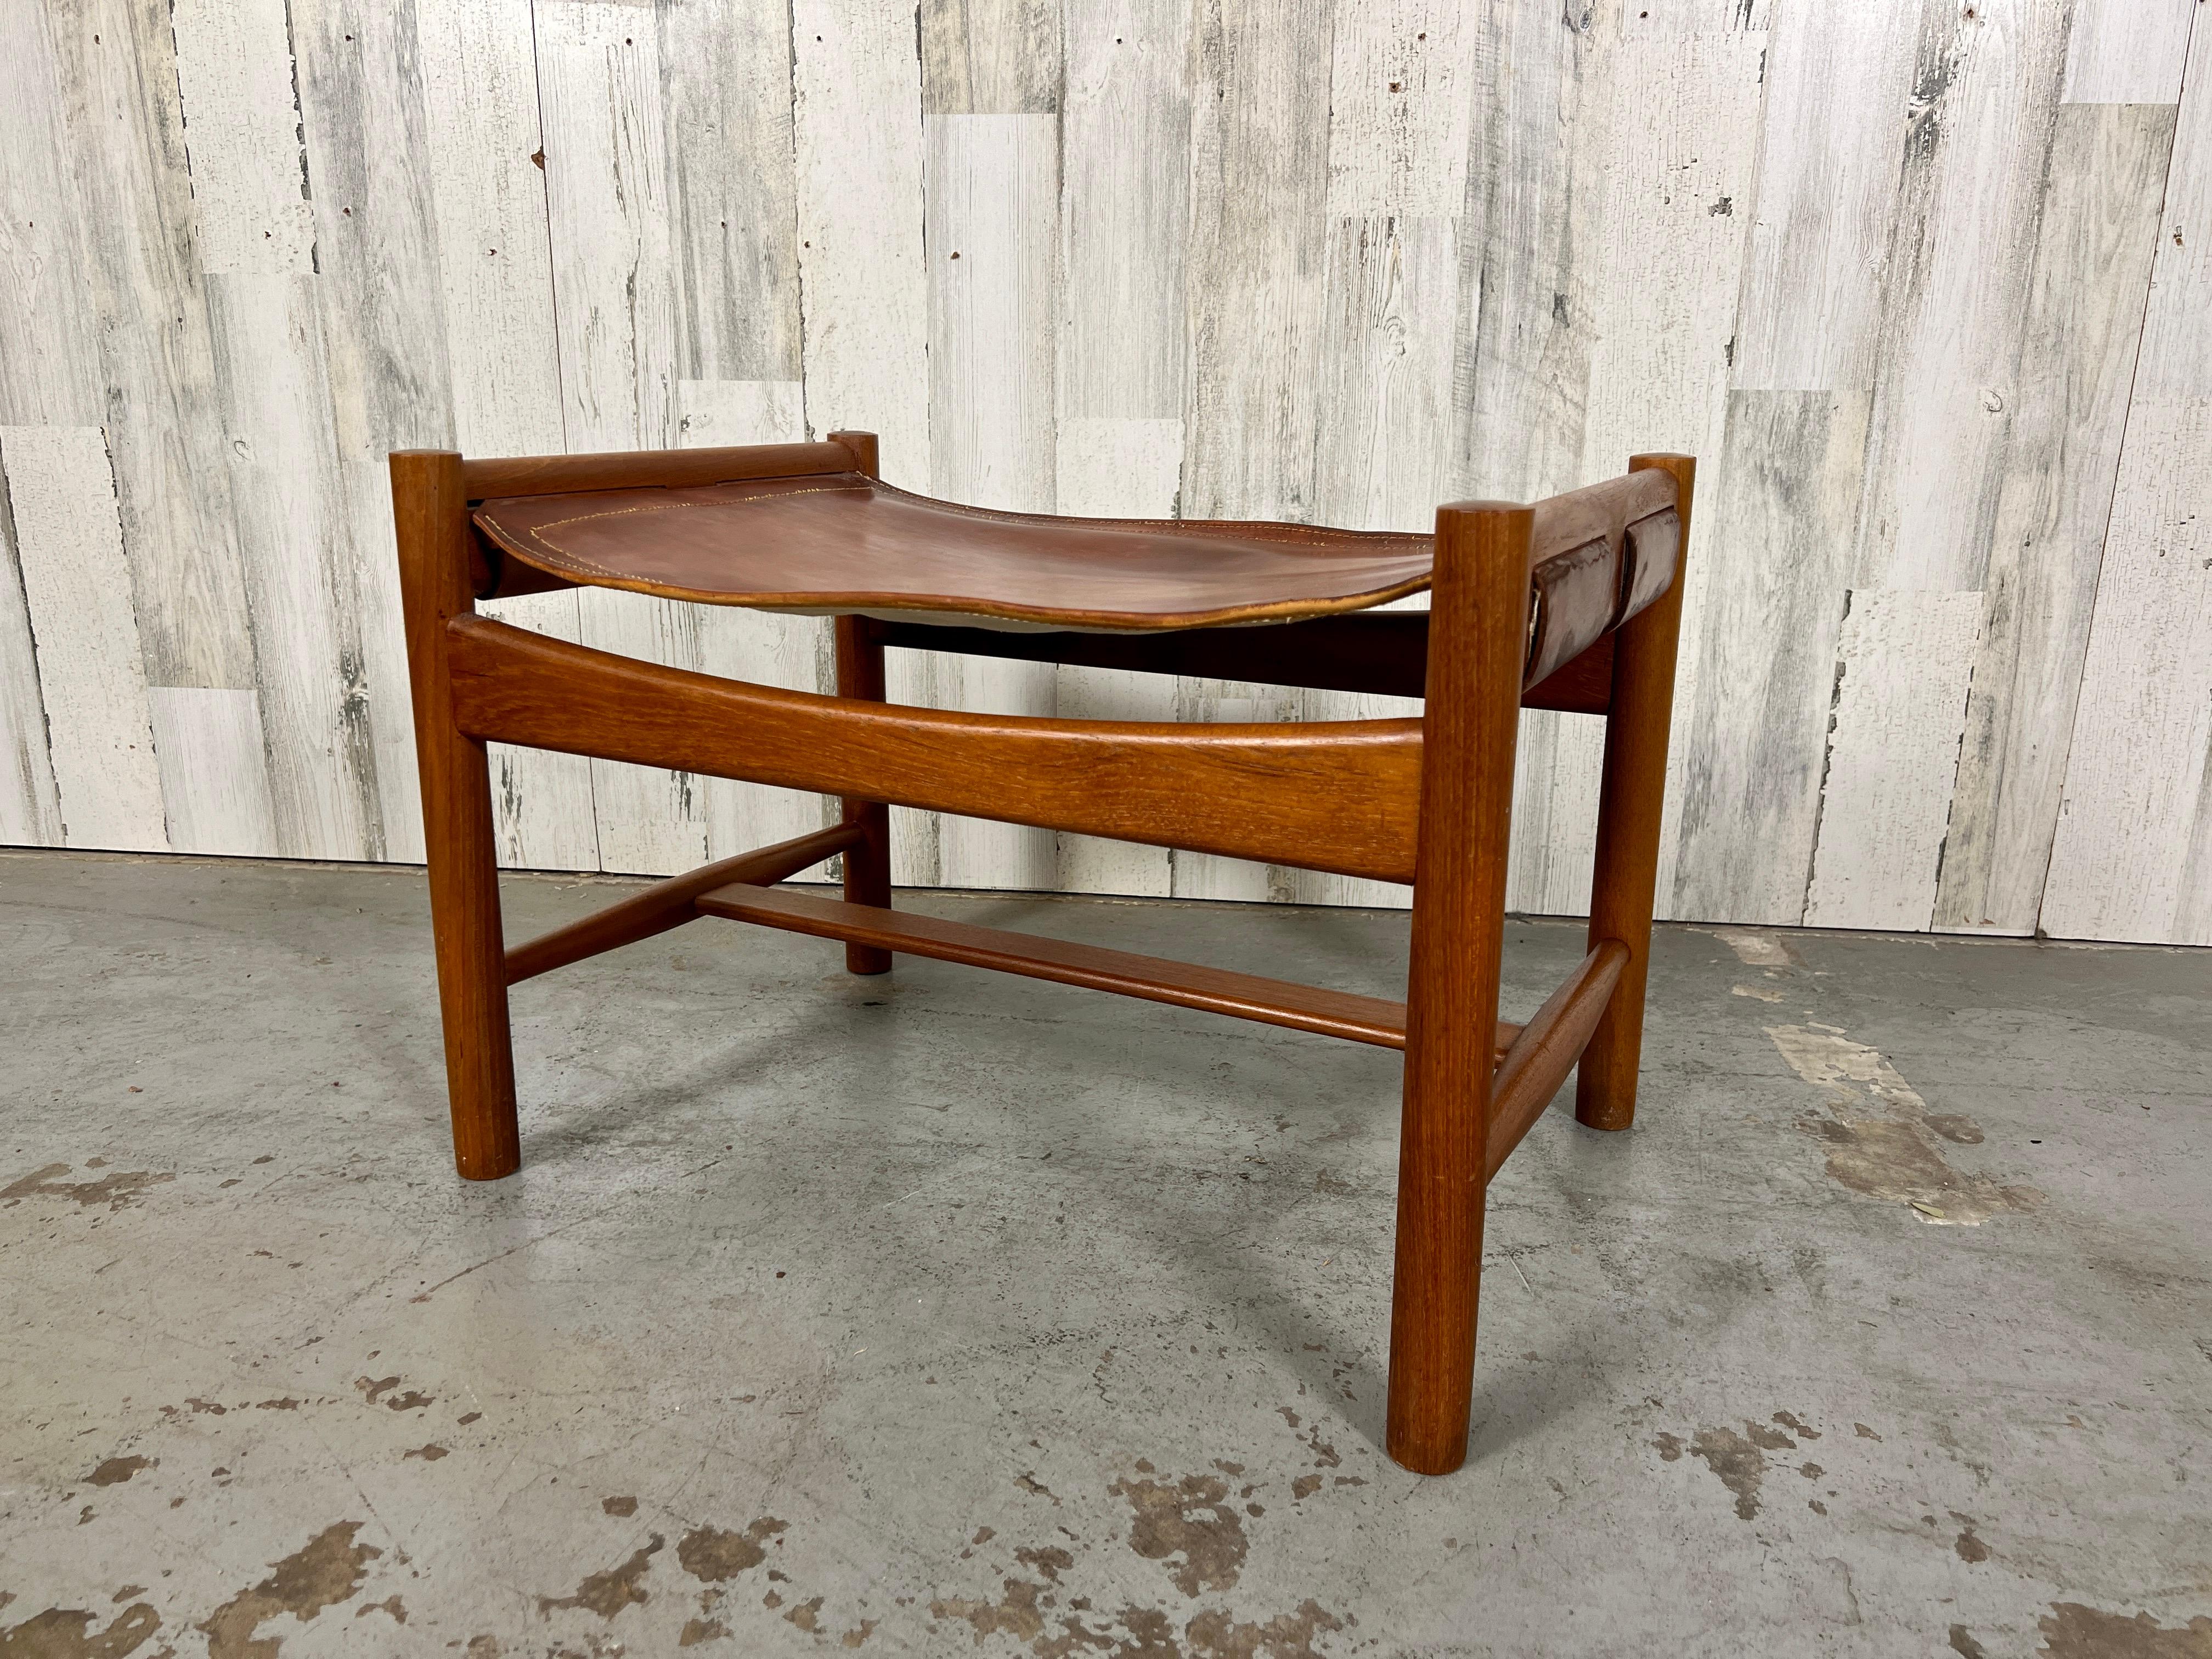 Rare Povl Dinesen Danish modern Teak ottoman with saddle leather sling. The leather has lots of patina with minor spotting. 